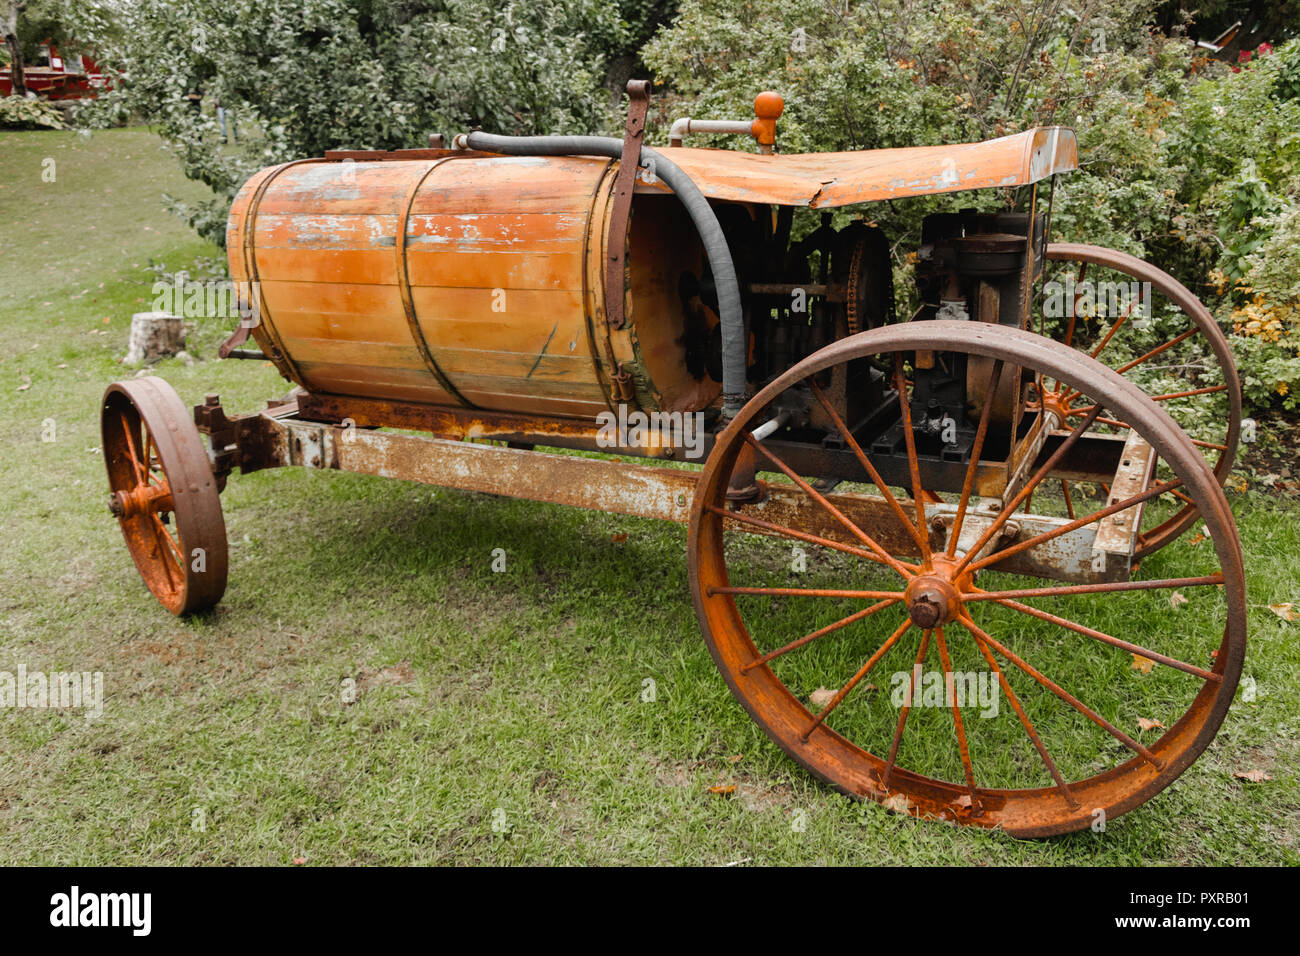 Antique Carriage With Sprayer Pump - orchard equipment Stock Photo